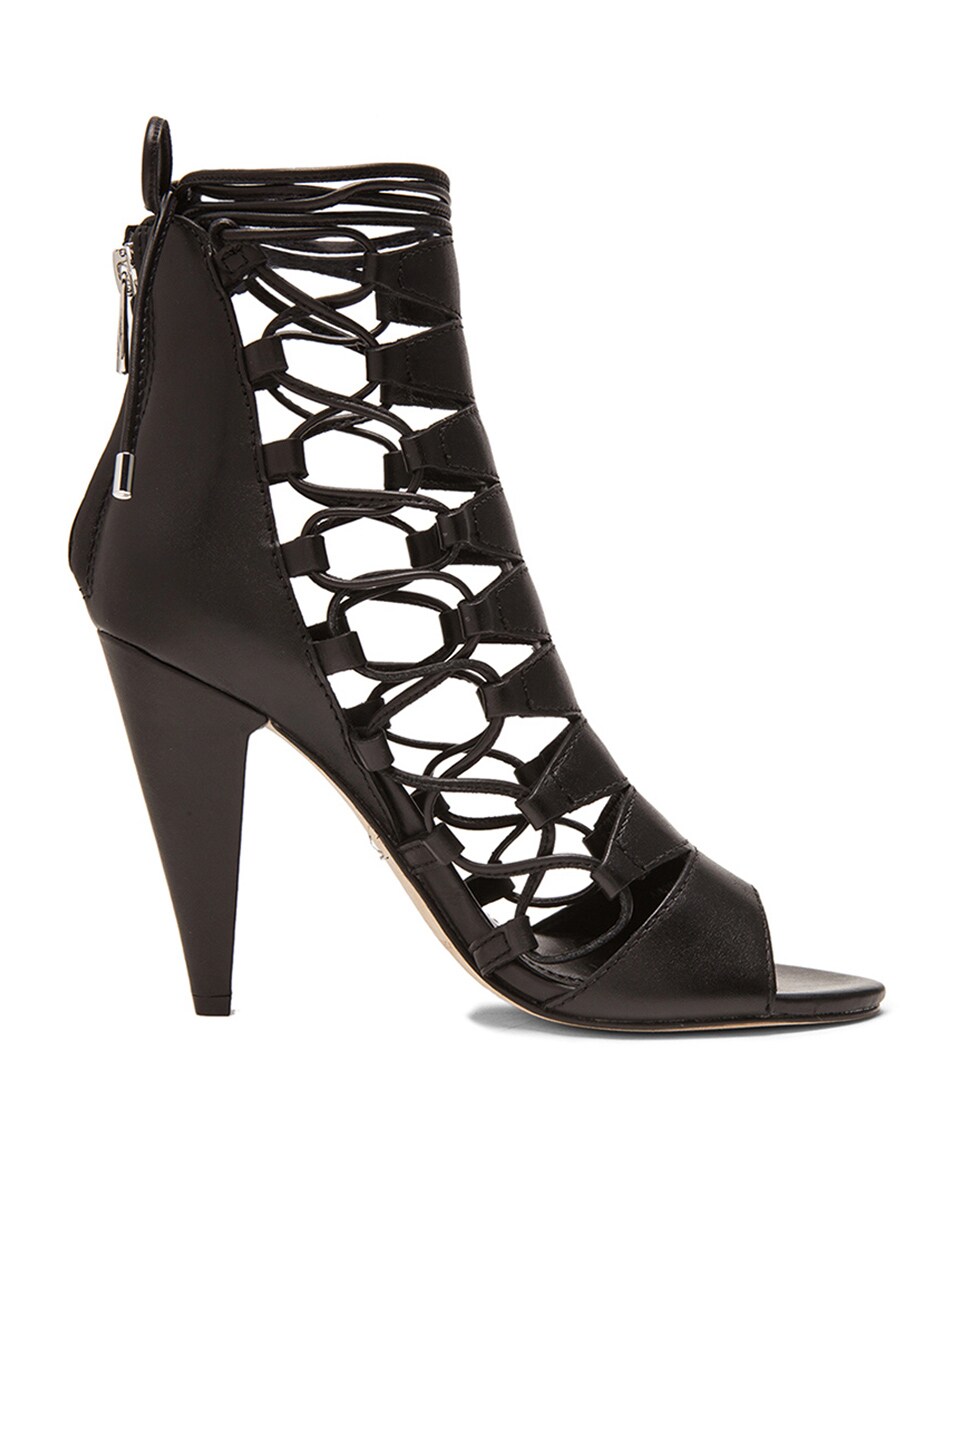 Image 1 of Sigerson Morrison Magola Lace Up Leather Heels in Black